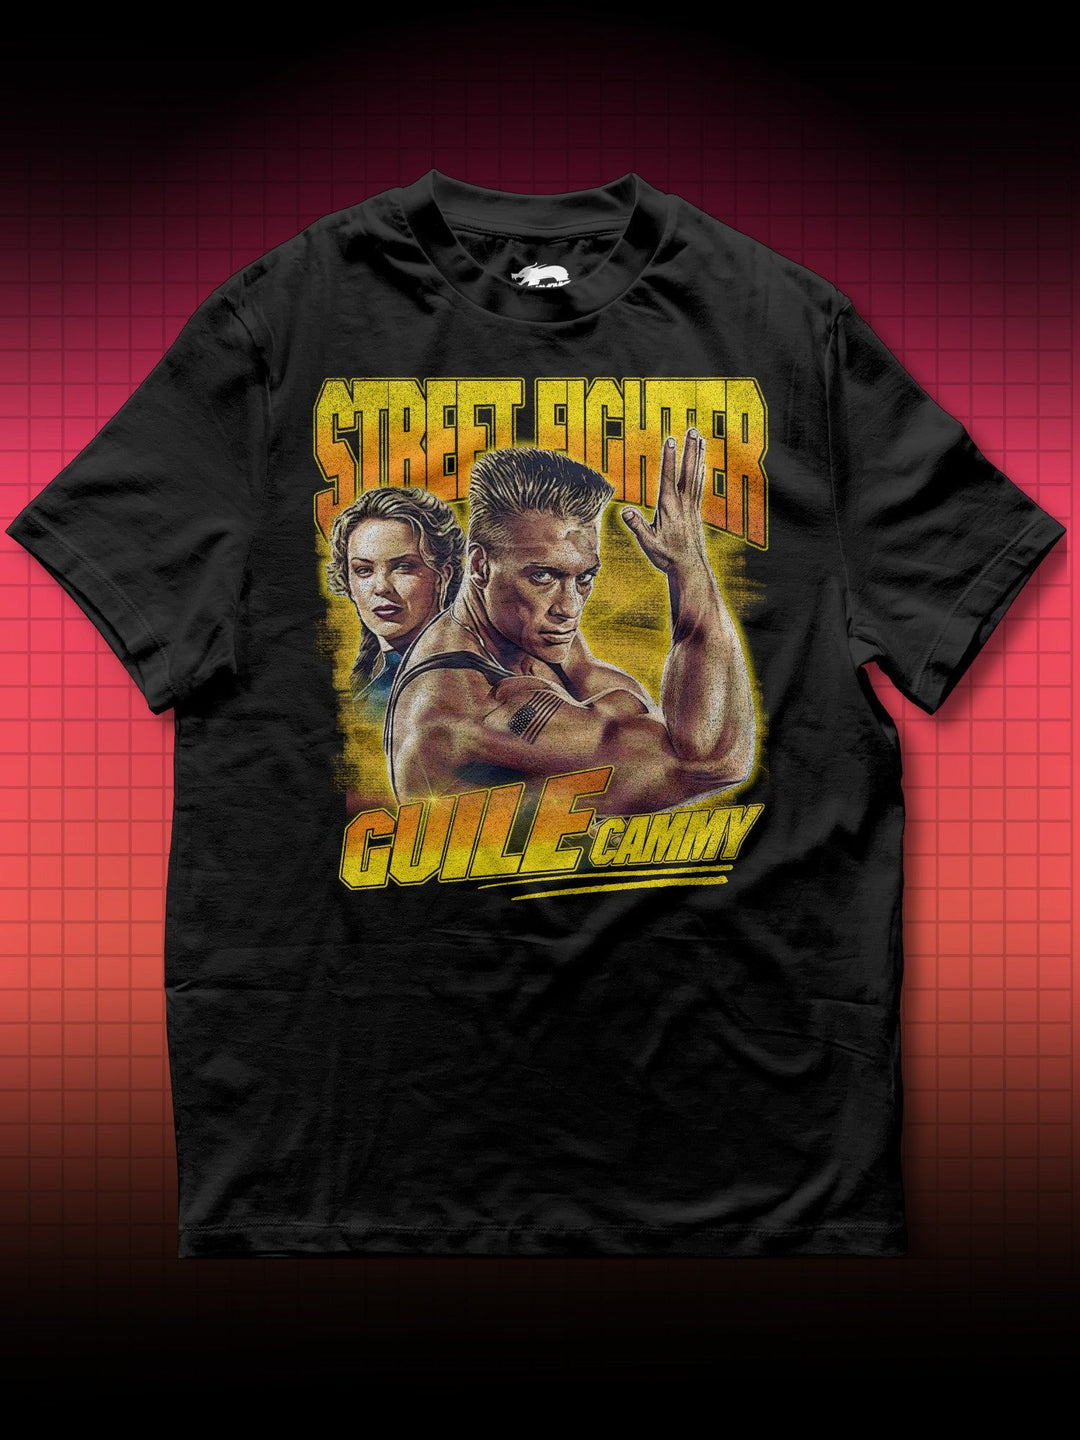 STREET FIGHTER - GUILE AND CAMMIE | JEAN-CLAUDE VAN DAMME | T-SHIRT - DRAMAMONKS